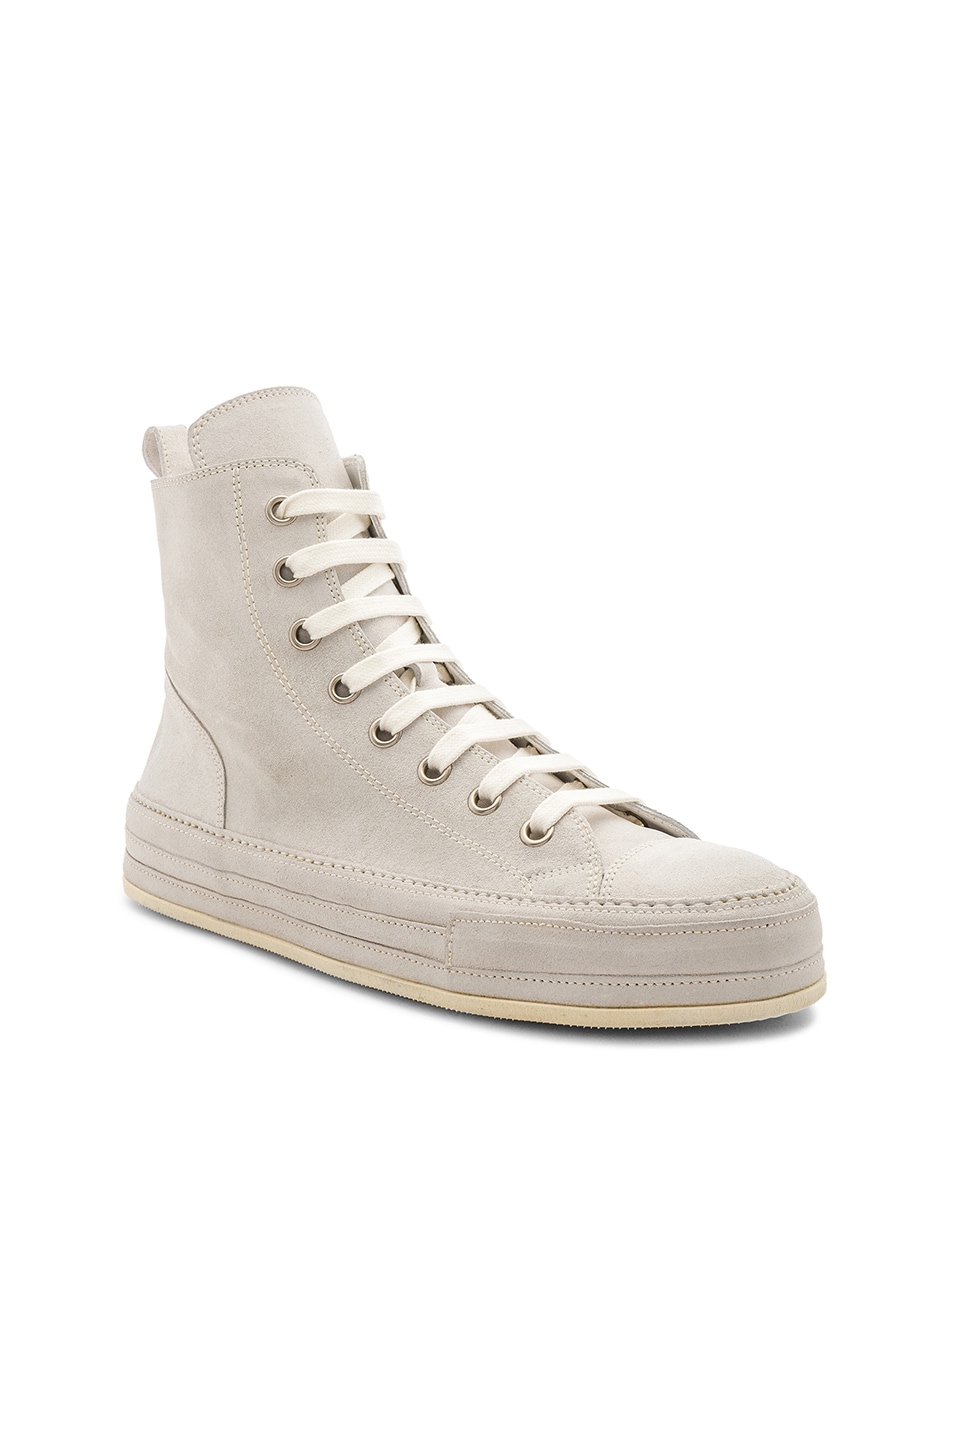 Image 1 of Ann Demeulemeester High Top Sneakers in Latte